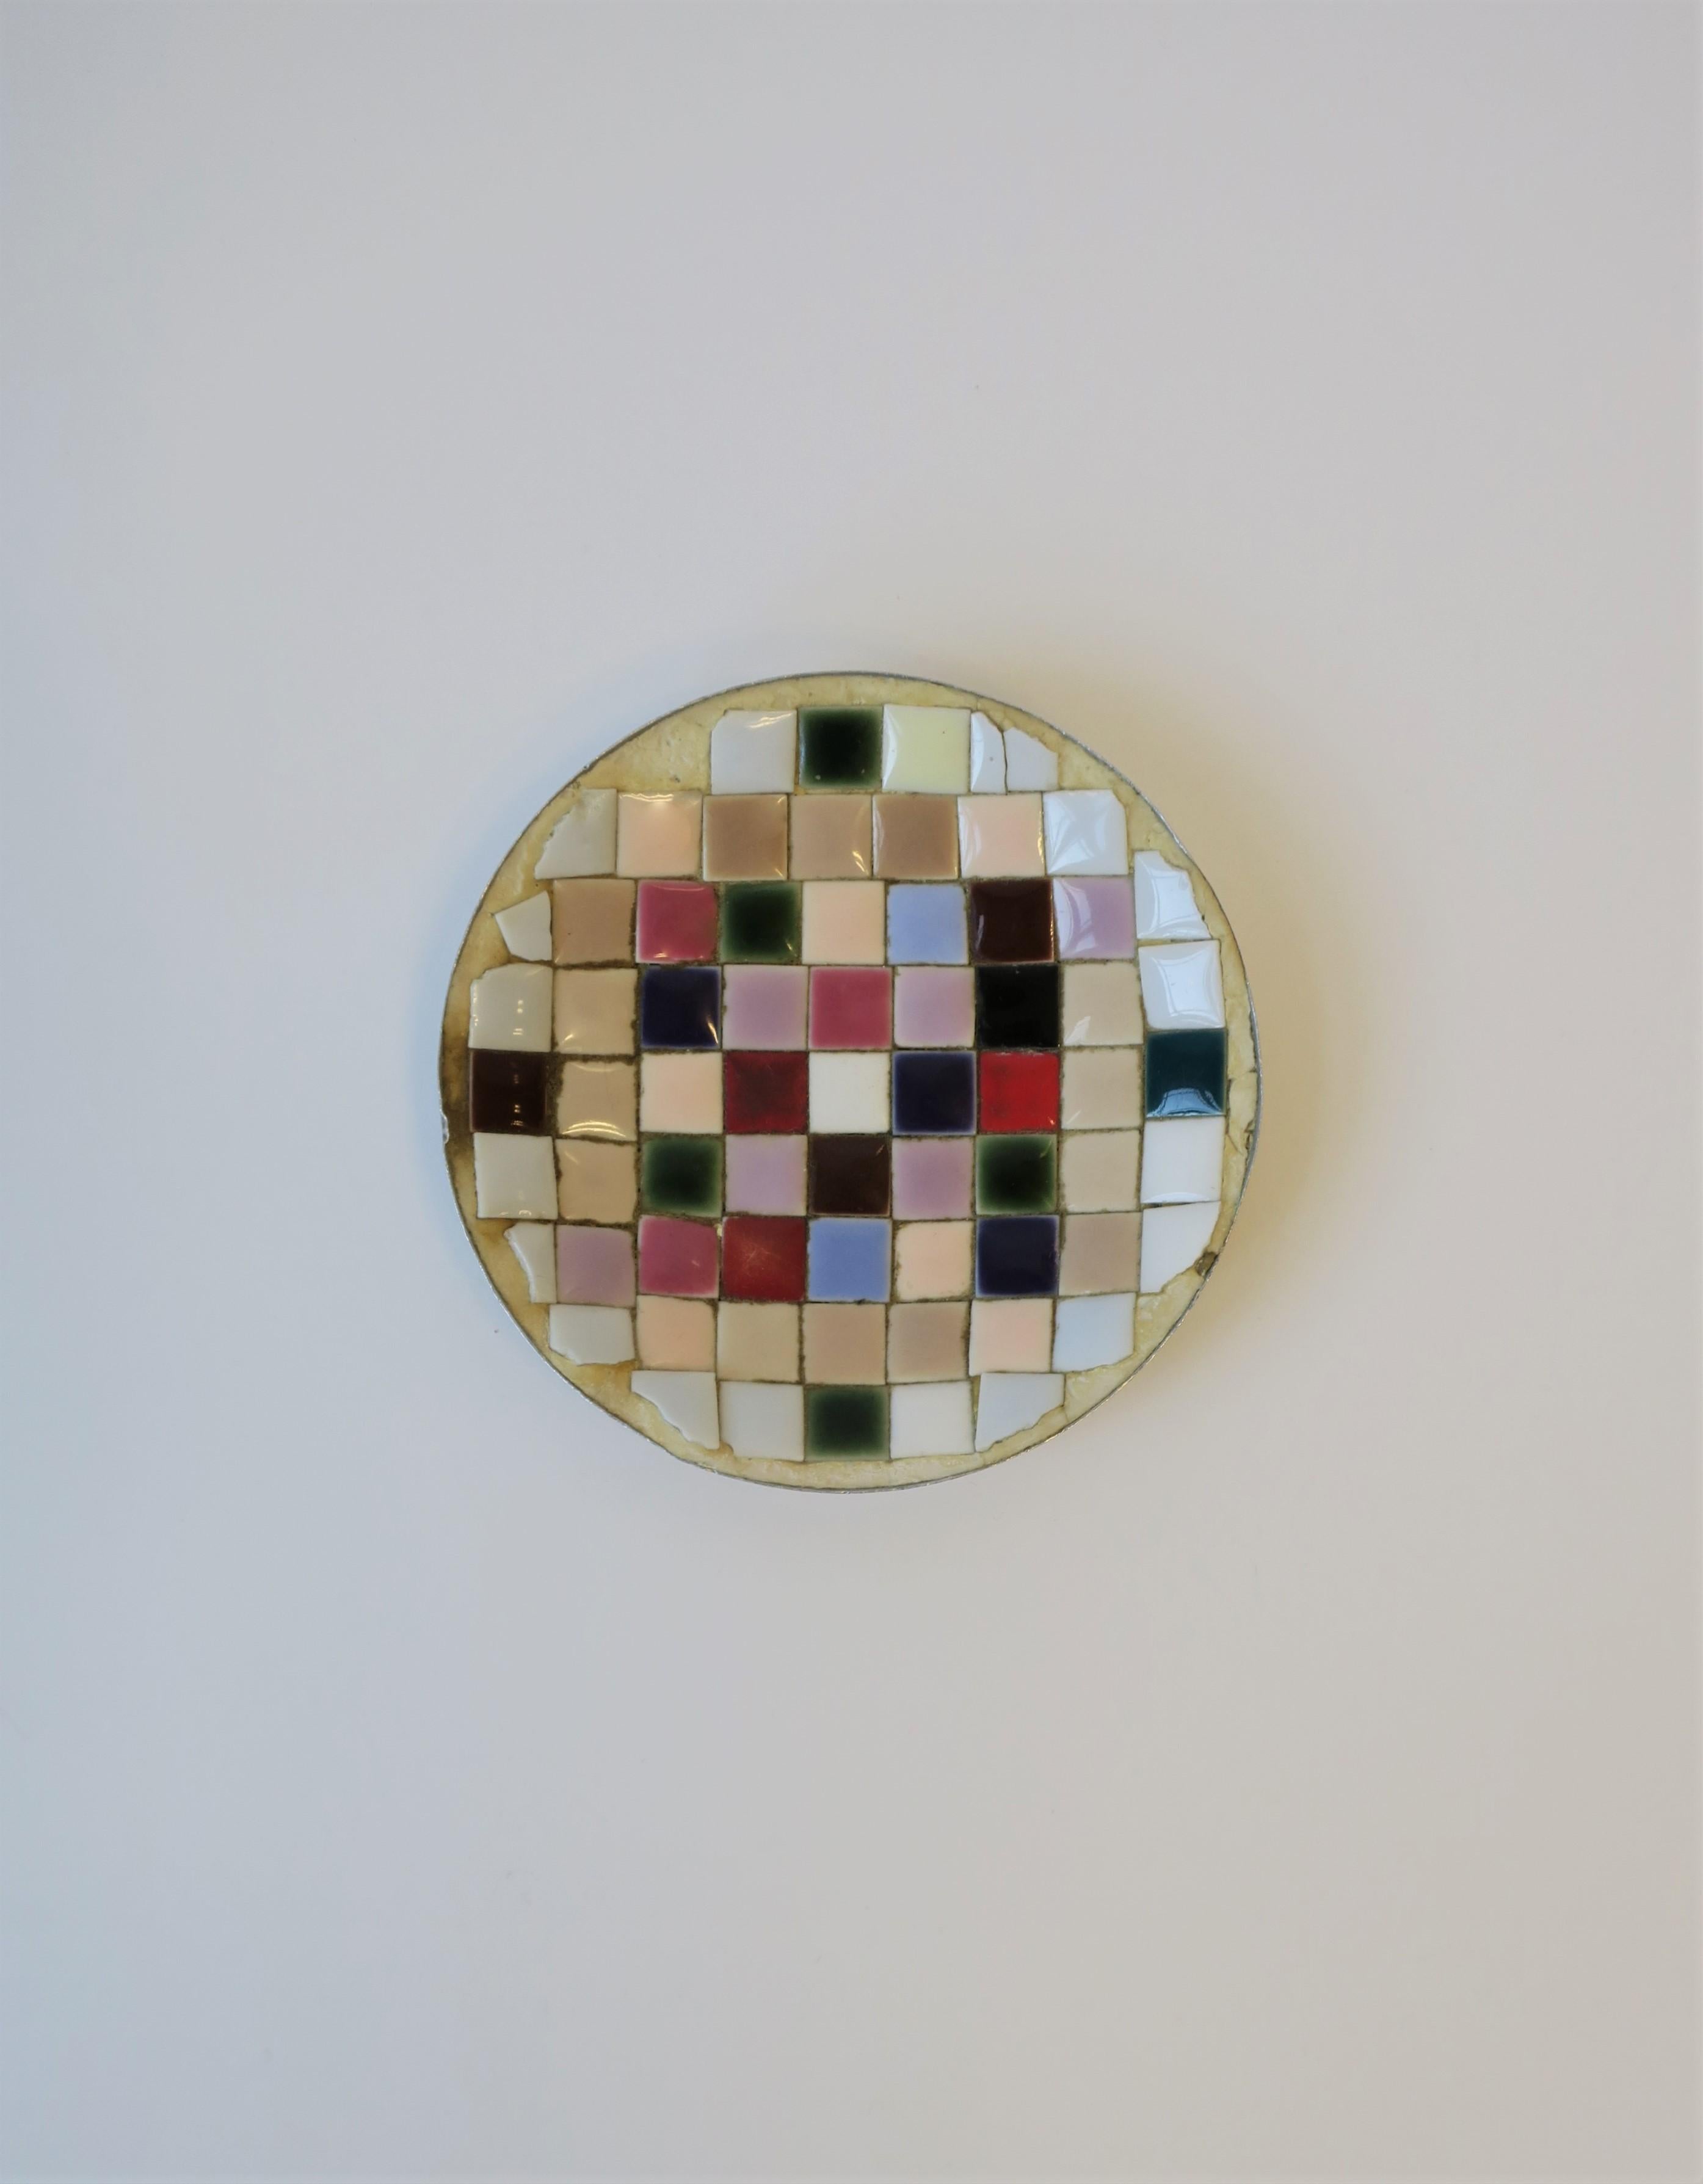 A small Mid-Century Modern period pastel mosaic ceramic tile dish, circa 1960s, USA. Dish is made of predominantly white, neutral and pink tiles and touches red and hunter green. A nice piece to hold small items for a vanity/bedside, desk, etc.